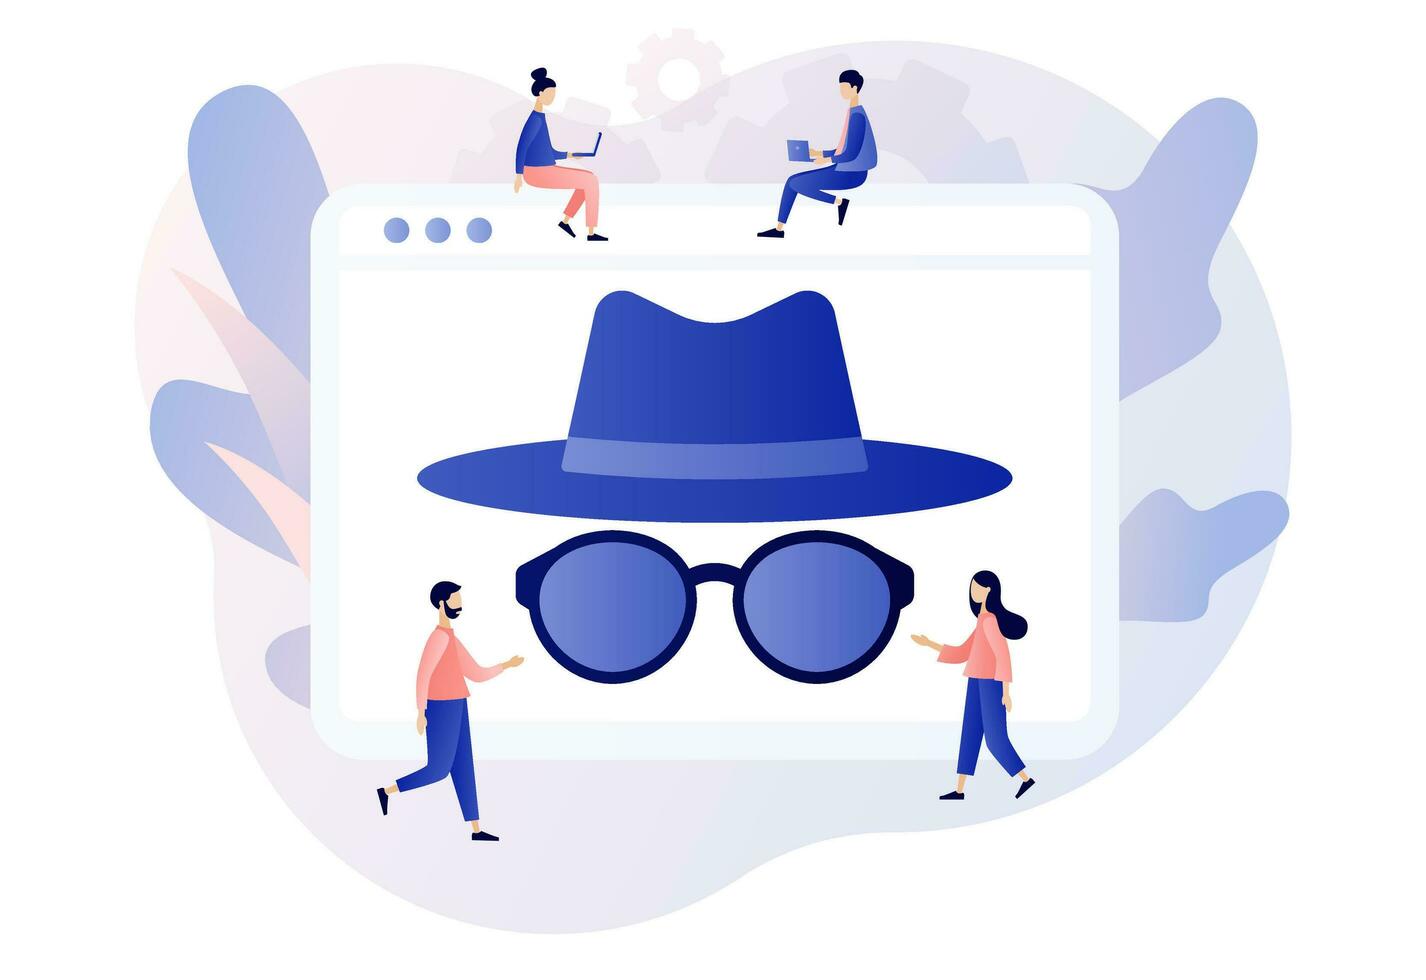 Incognito mode concept. Browse in private. Anonymous search. Online privacy and personal data protection. Confidential information. Modern flat cartoon style. Vector illustration on white background